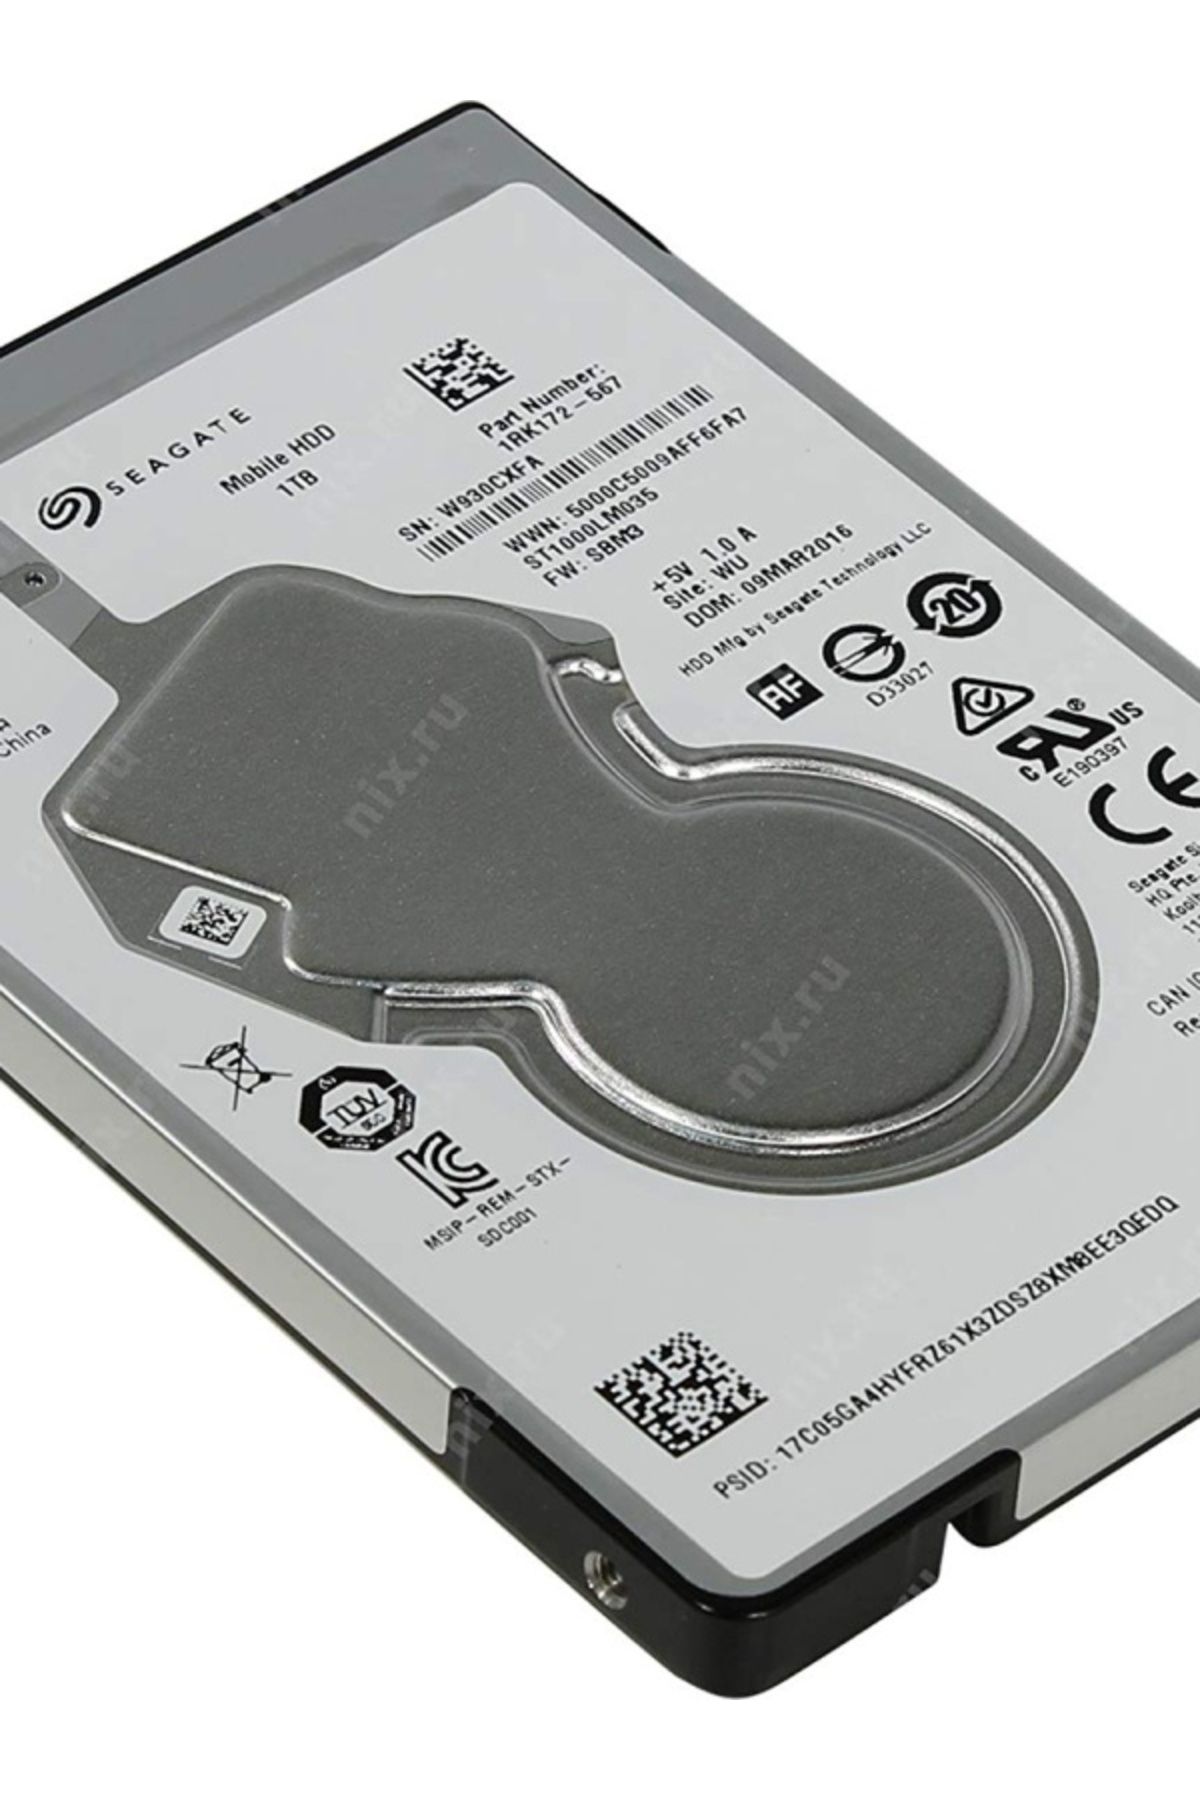 Seagate 1tb 5400rpm 2.5" Sata3 6.0gb-s 128mb-7mm Hdd St1000lm035 Notebook Harddisk